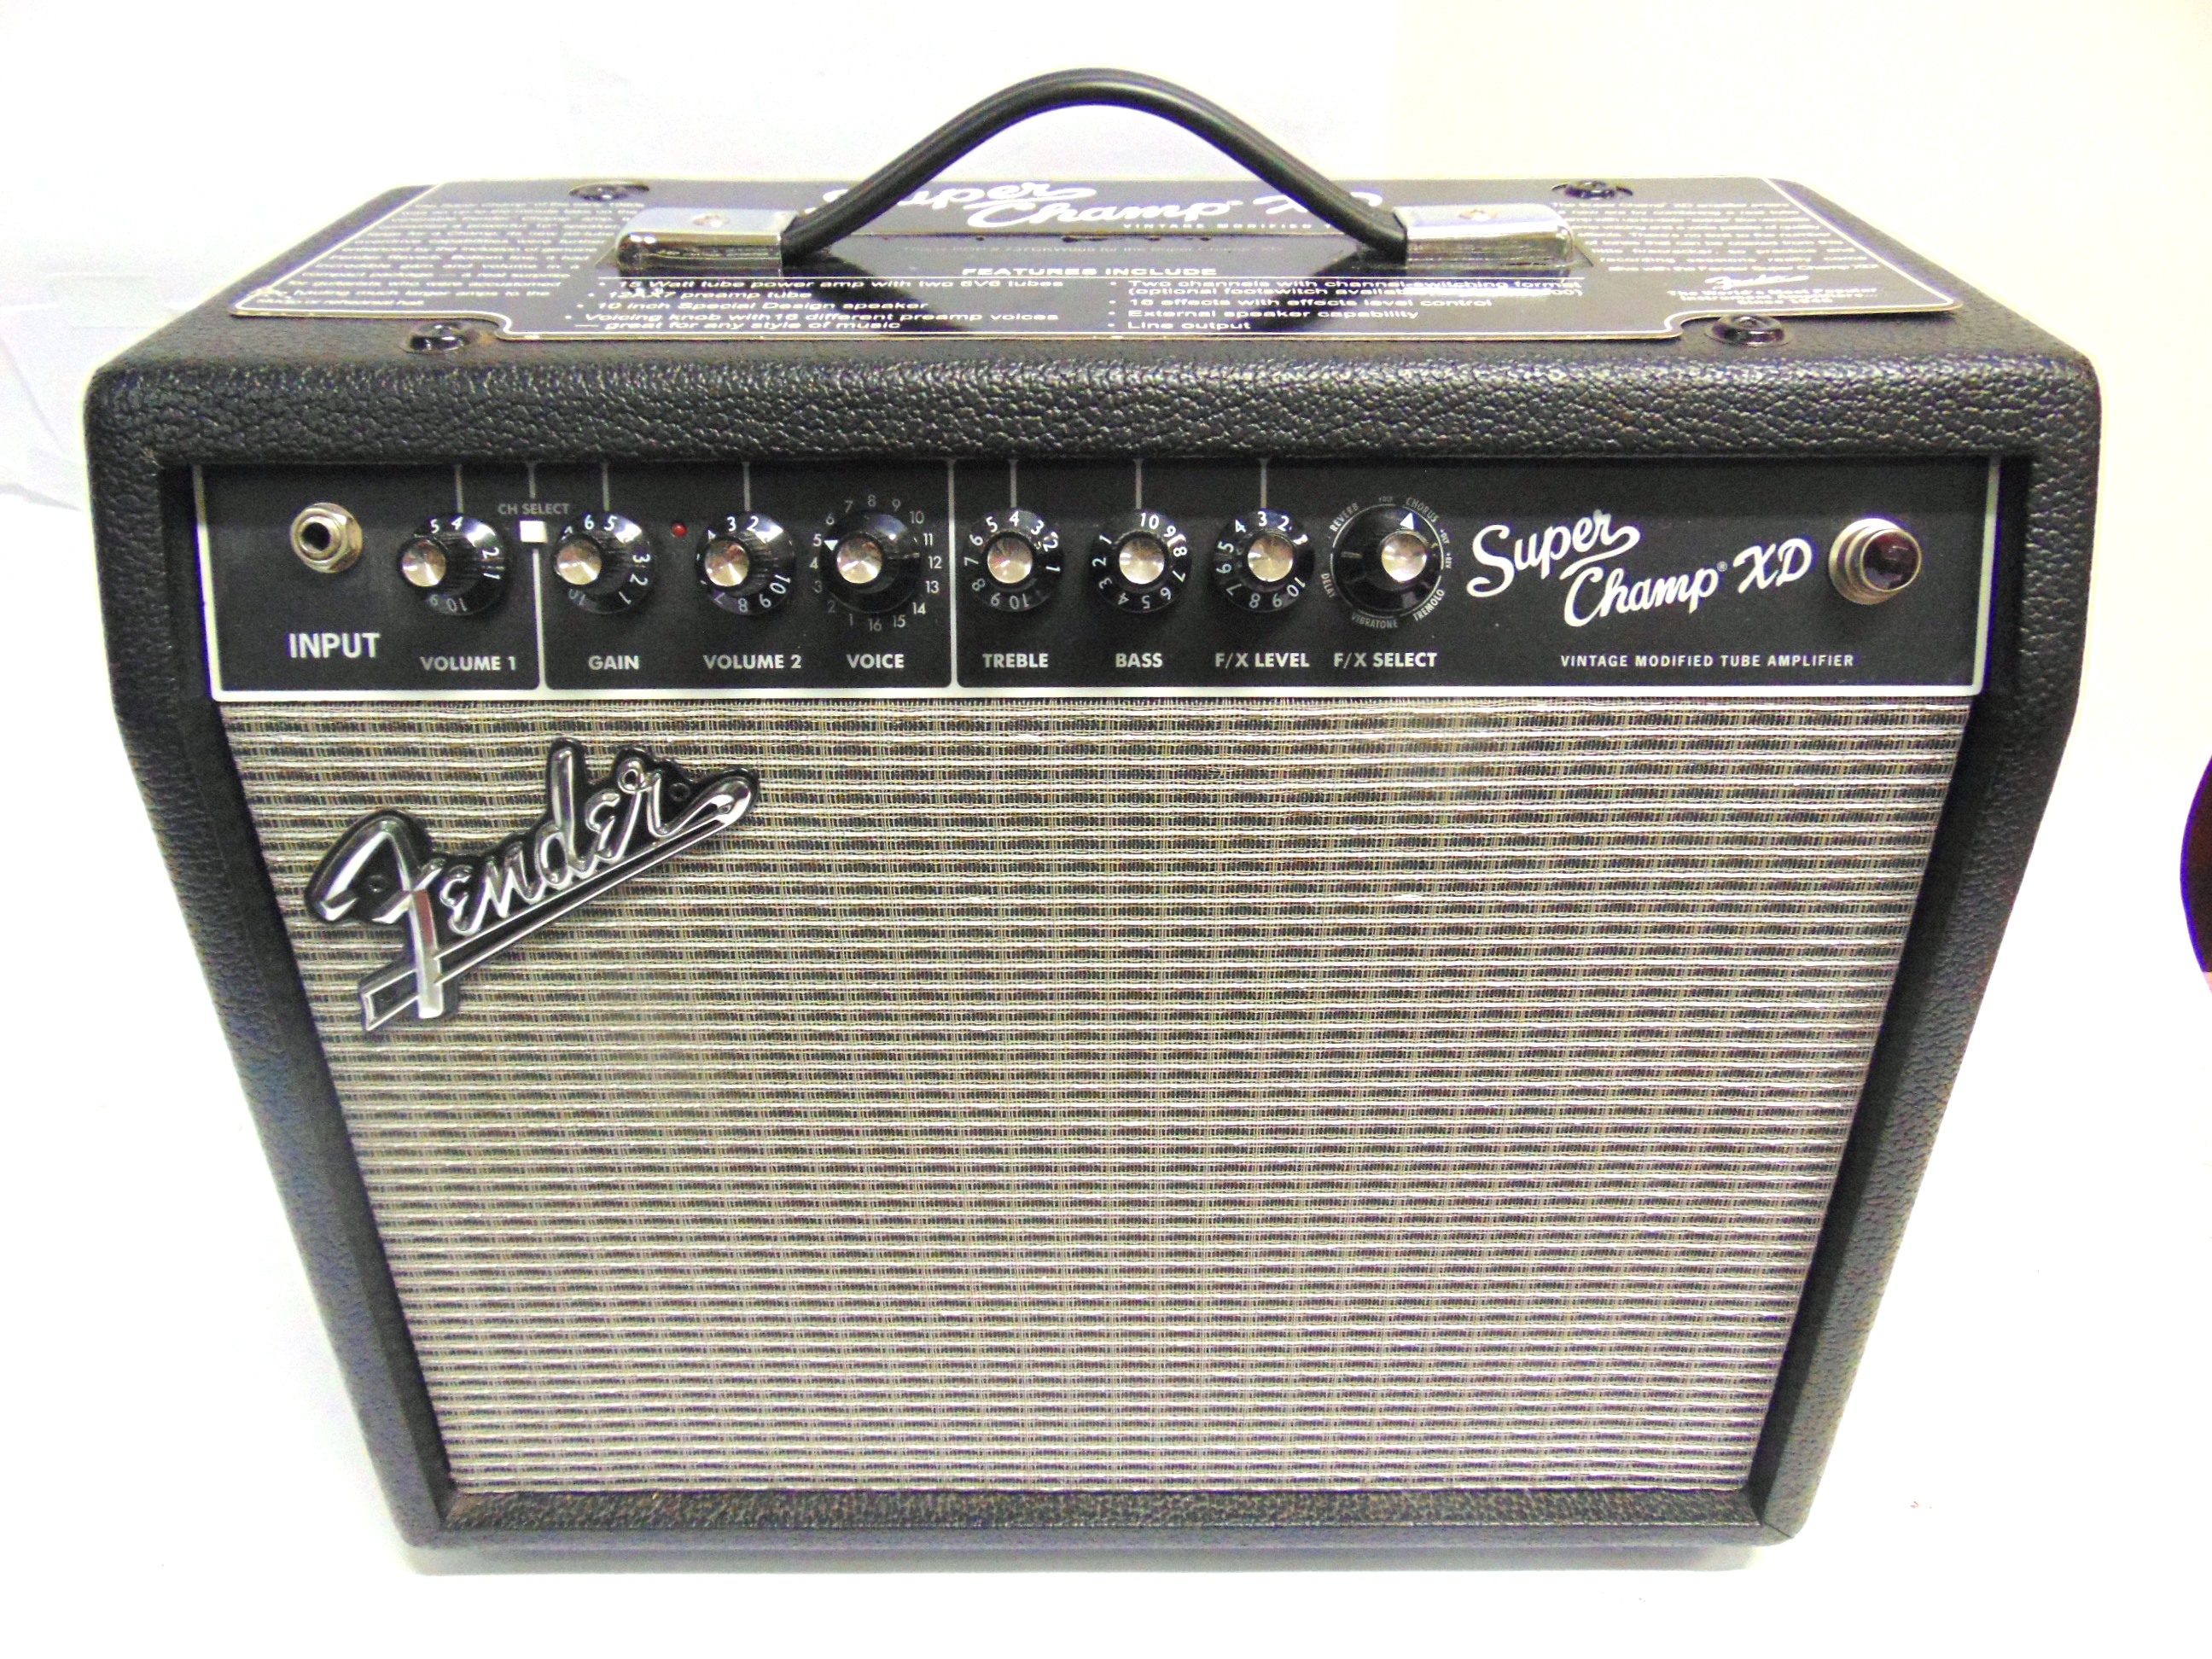 A FENDER SUPER CHAMP XD GUITAR AMPLIFIER with 20 watts output, twin channels, sixteen voices, and